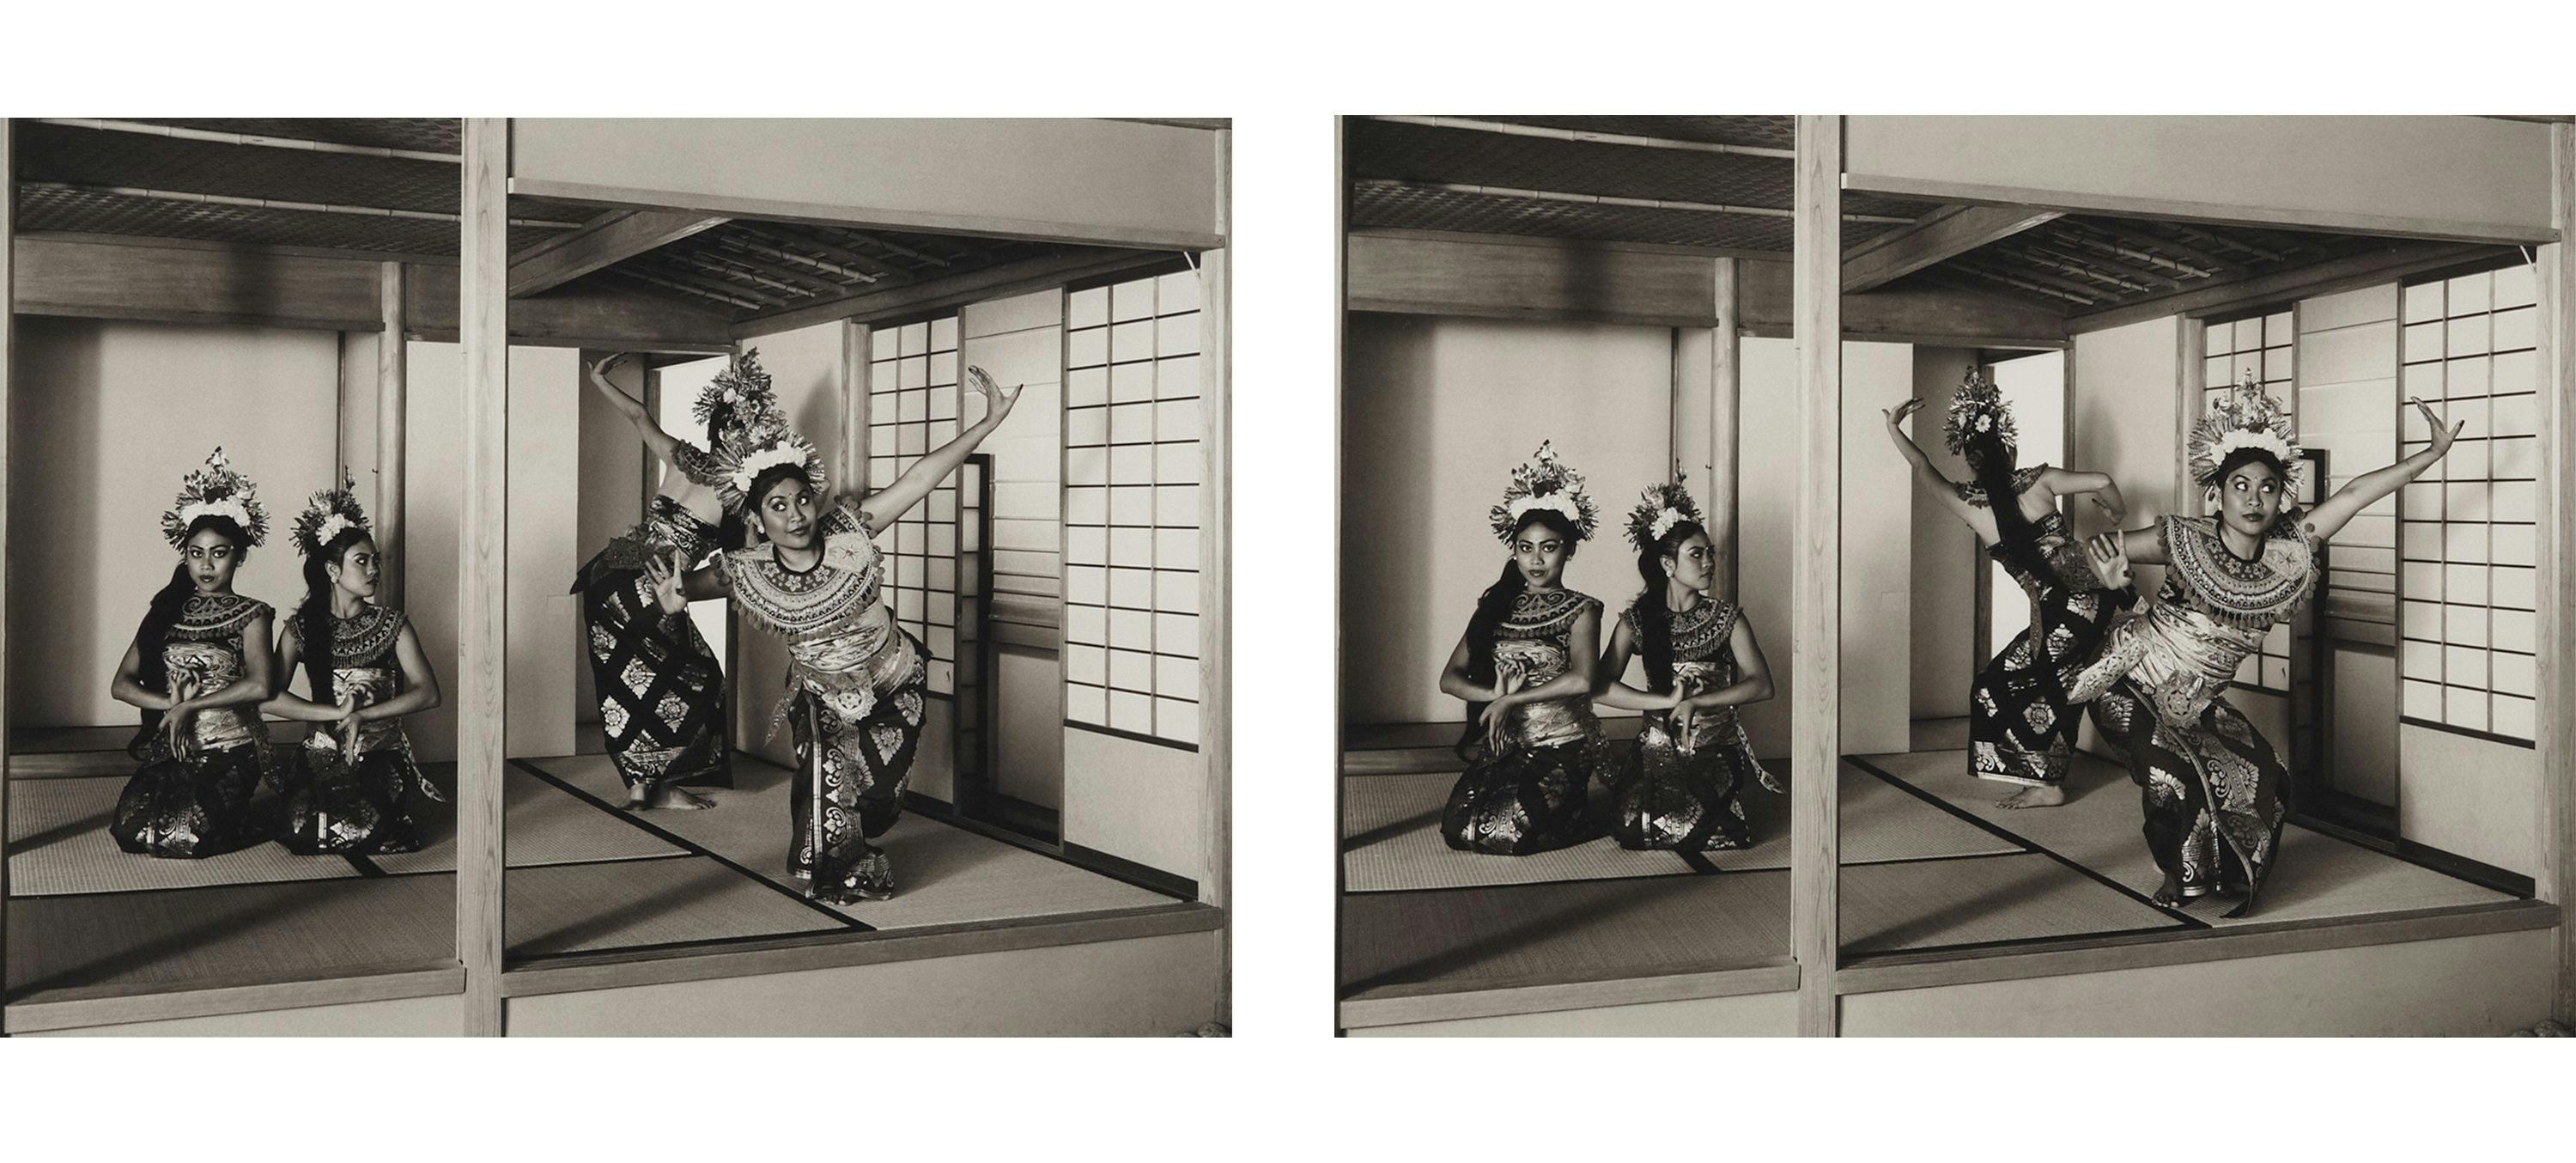 A photograph by Christopher Williams, titled From left to right: Mita Wimboprasetyo, Wuri Wimboprasetyo, Sandra Kosasih, Nancy Allard performing an excerpt from Janger. (Nr. 1 and 2), dated 2002.